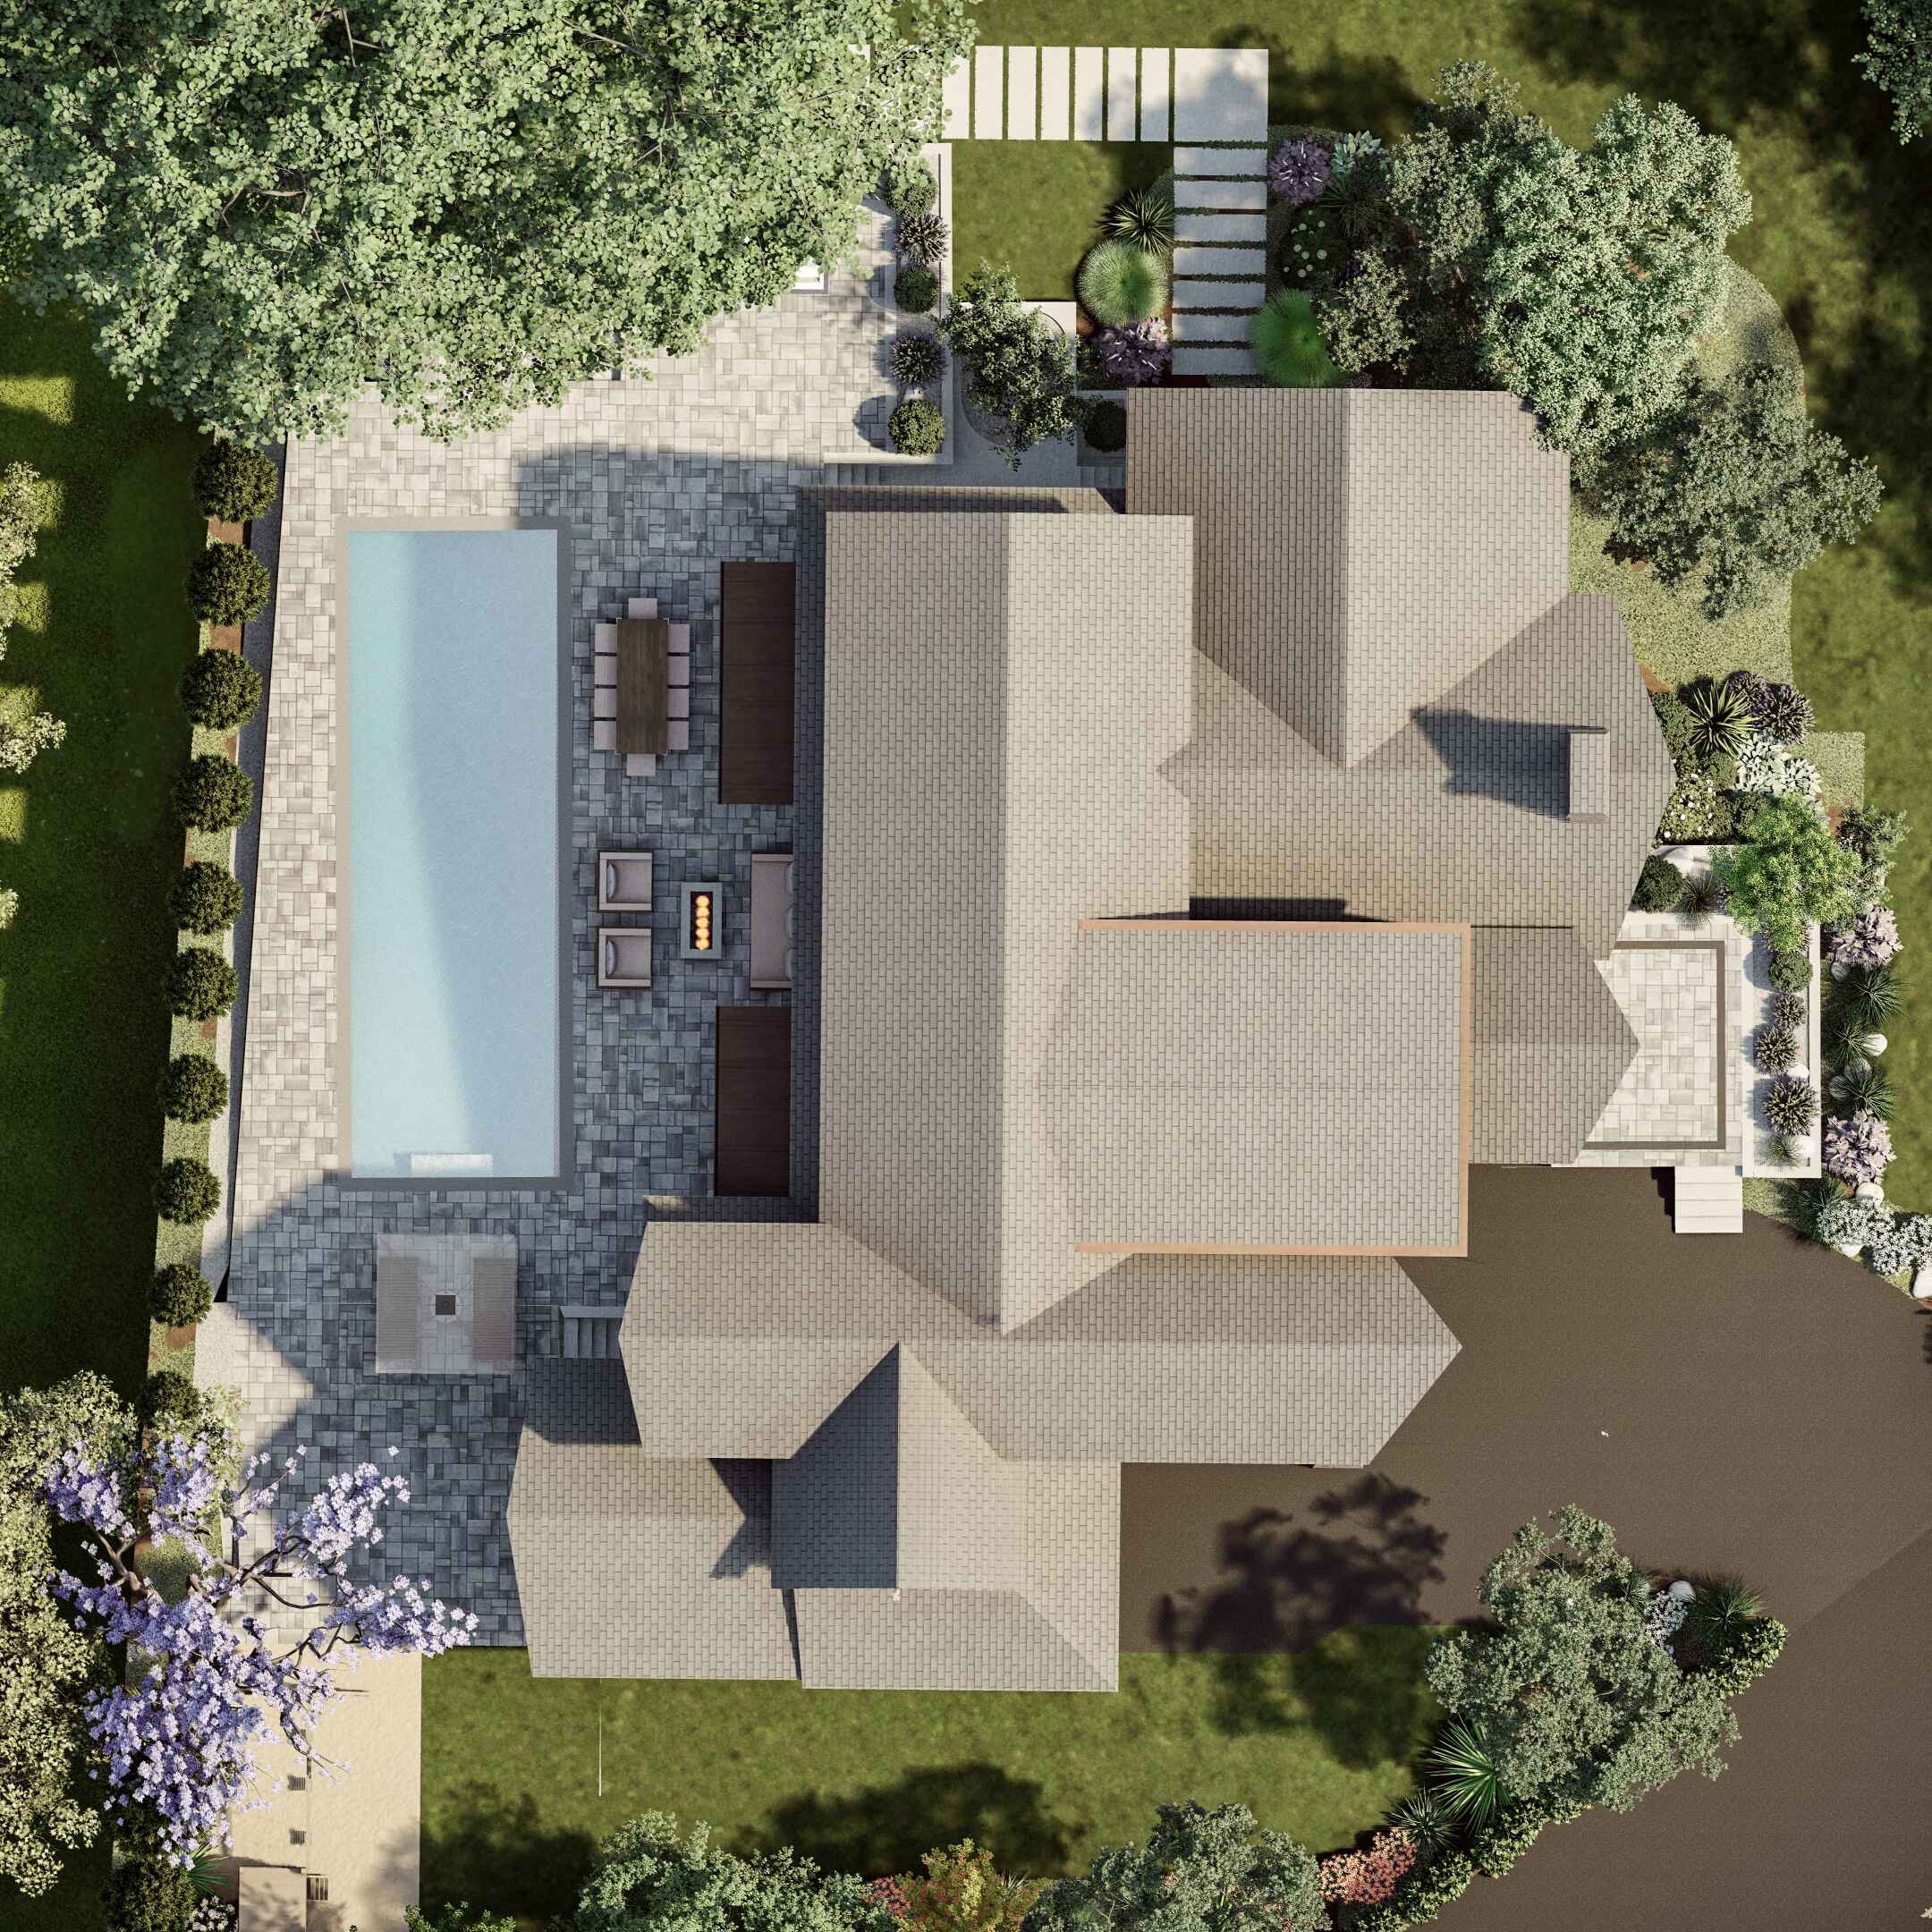 Overhead view of a full-yard landscape design featuring a swimming pool, paved patio, and lush garden areas, created by Homely Design Experts.